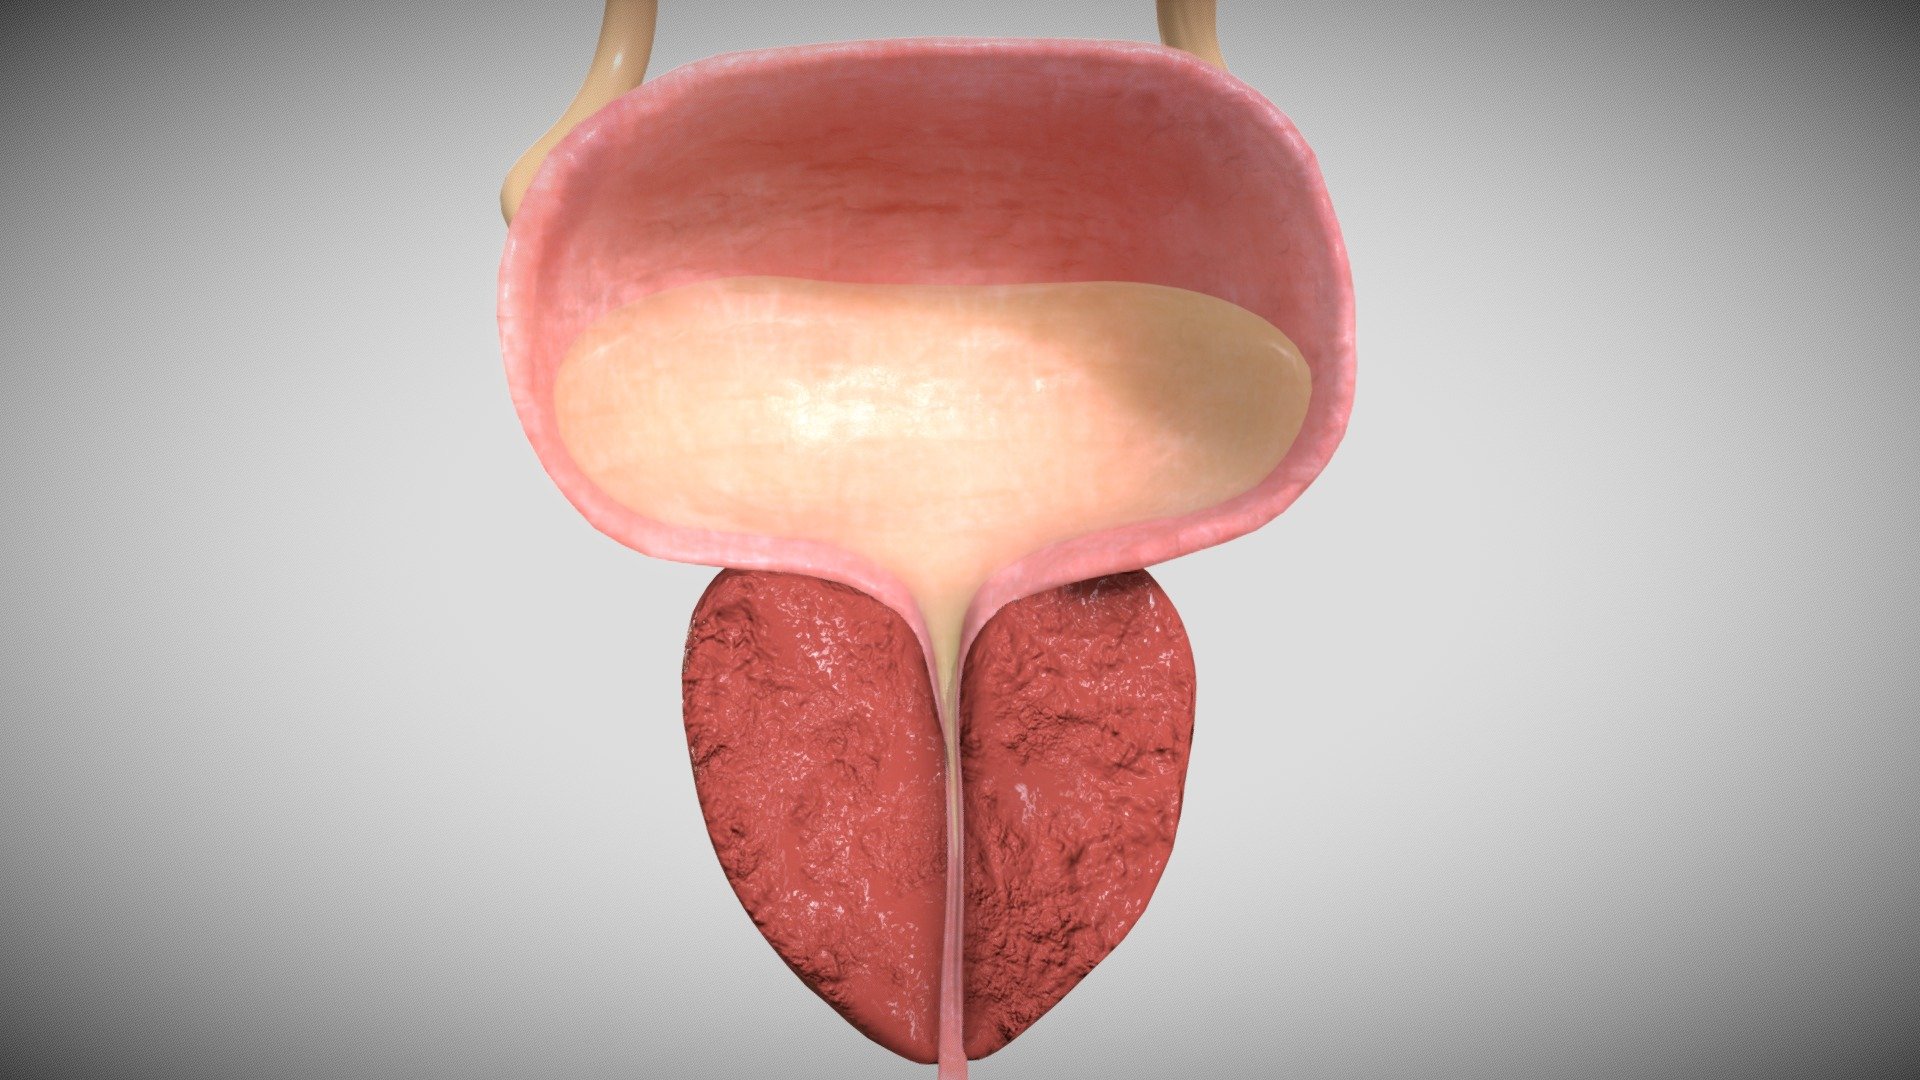 Benign prostatic hyperplasia is a condition in which the prostate gland grows larger. The enlarged prostate may block or slow the passage of urine from the urethra 3d model